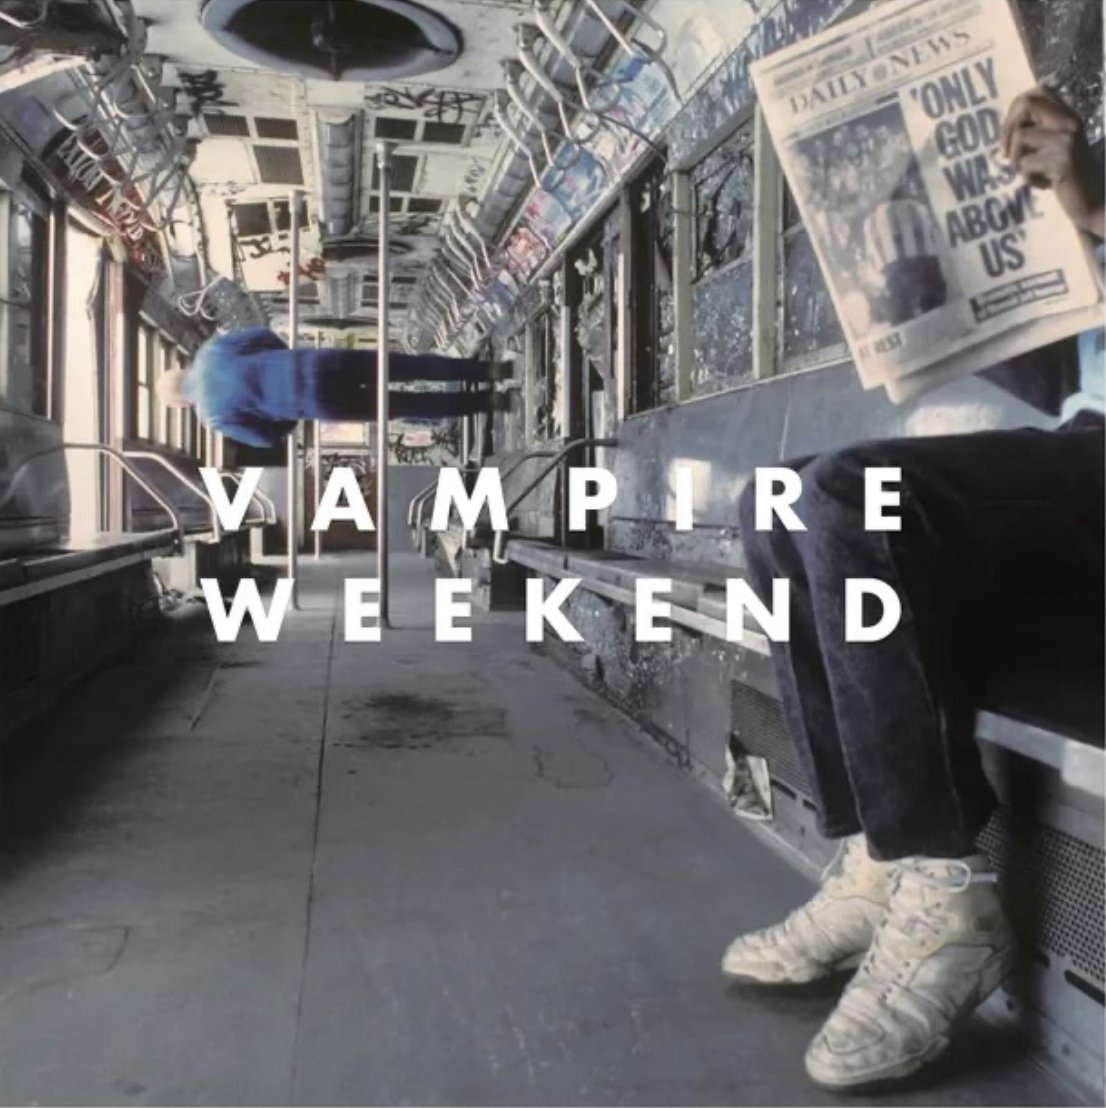 Do I have a favourite band? Why yes, I do have a favourite band. Their name is VAMPIRE WEEKEND, their new album ONLY GOD WAS ABOVE US is excellent, and that is going to be my jam this weekend, thank you for coming to my TED Talk